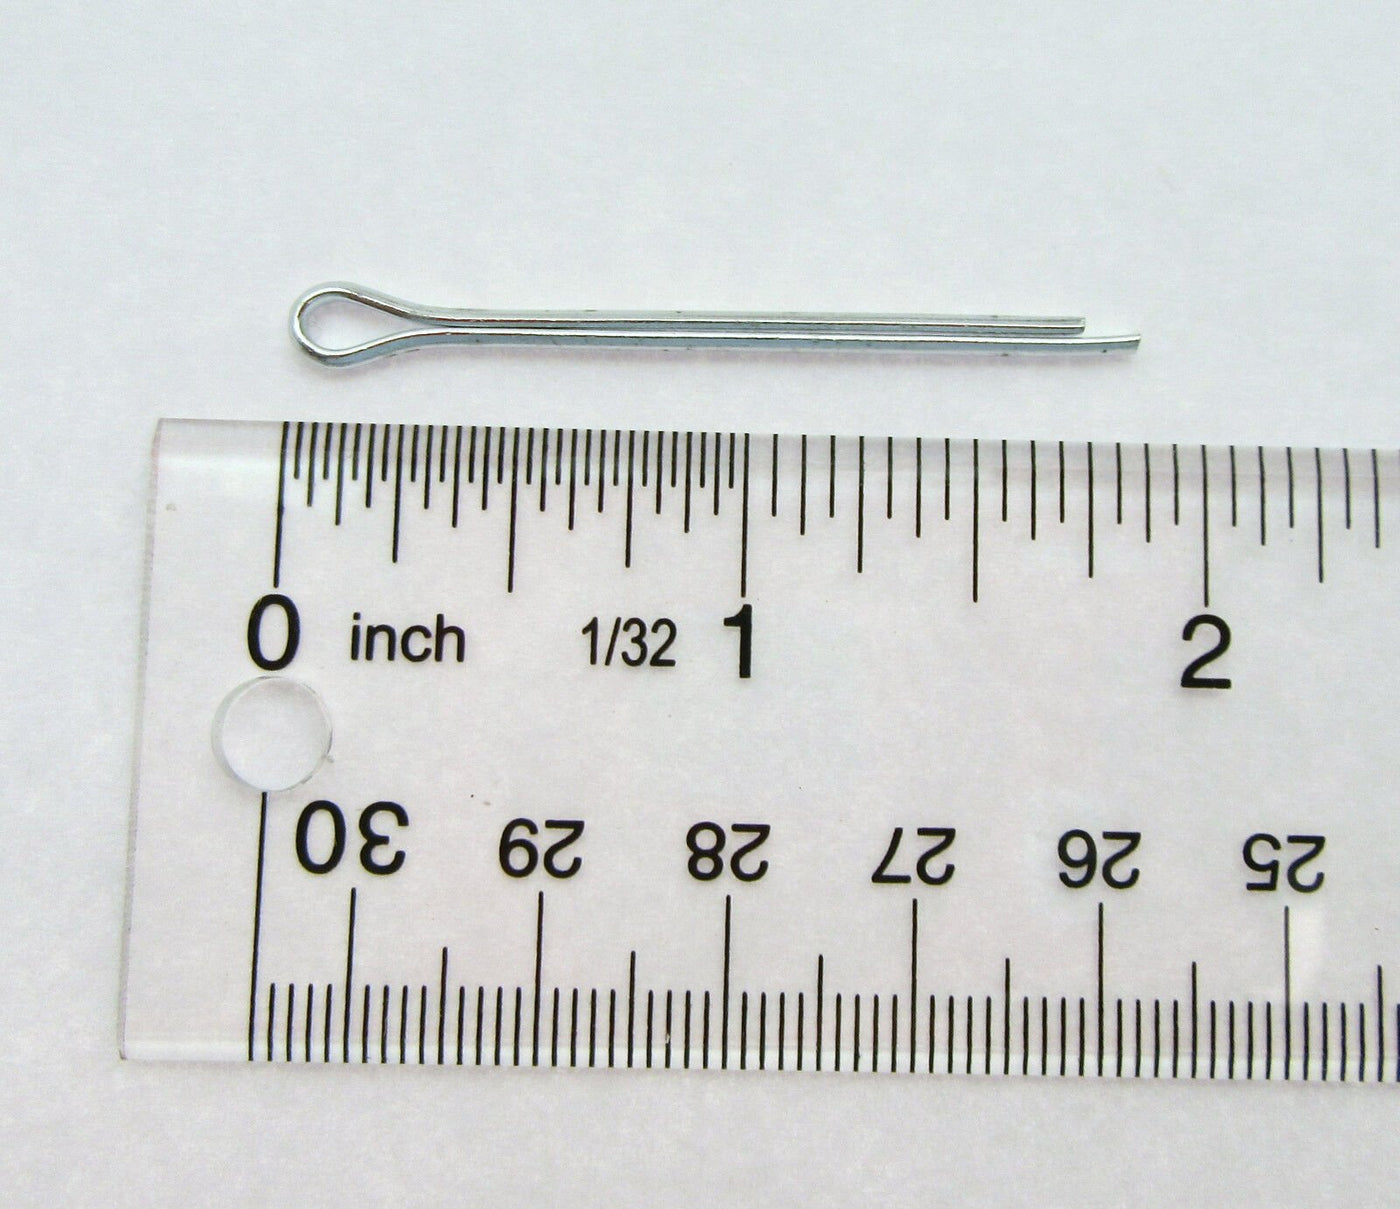 Cotter Split Pin ~ 3/32 inch x 1 1/2 inch ~ Extra Long ~ Zinc Plated ~ 4 Pack